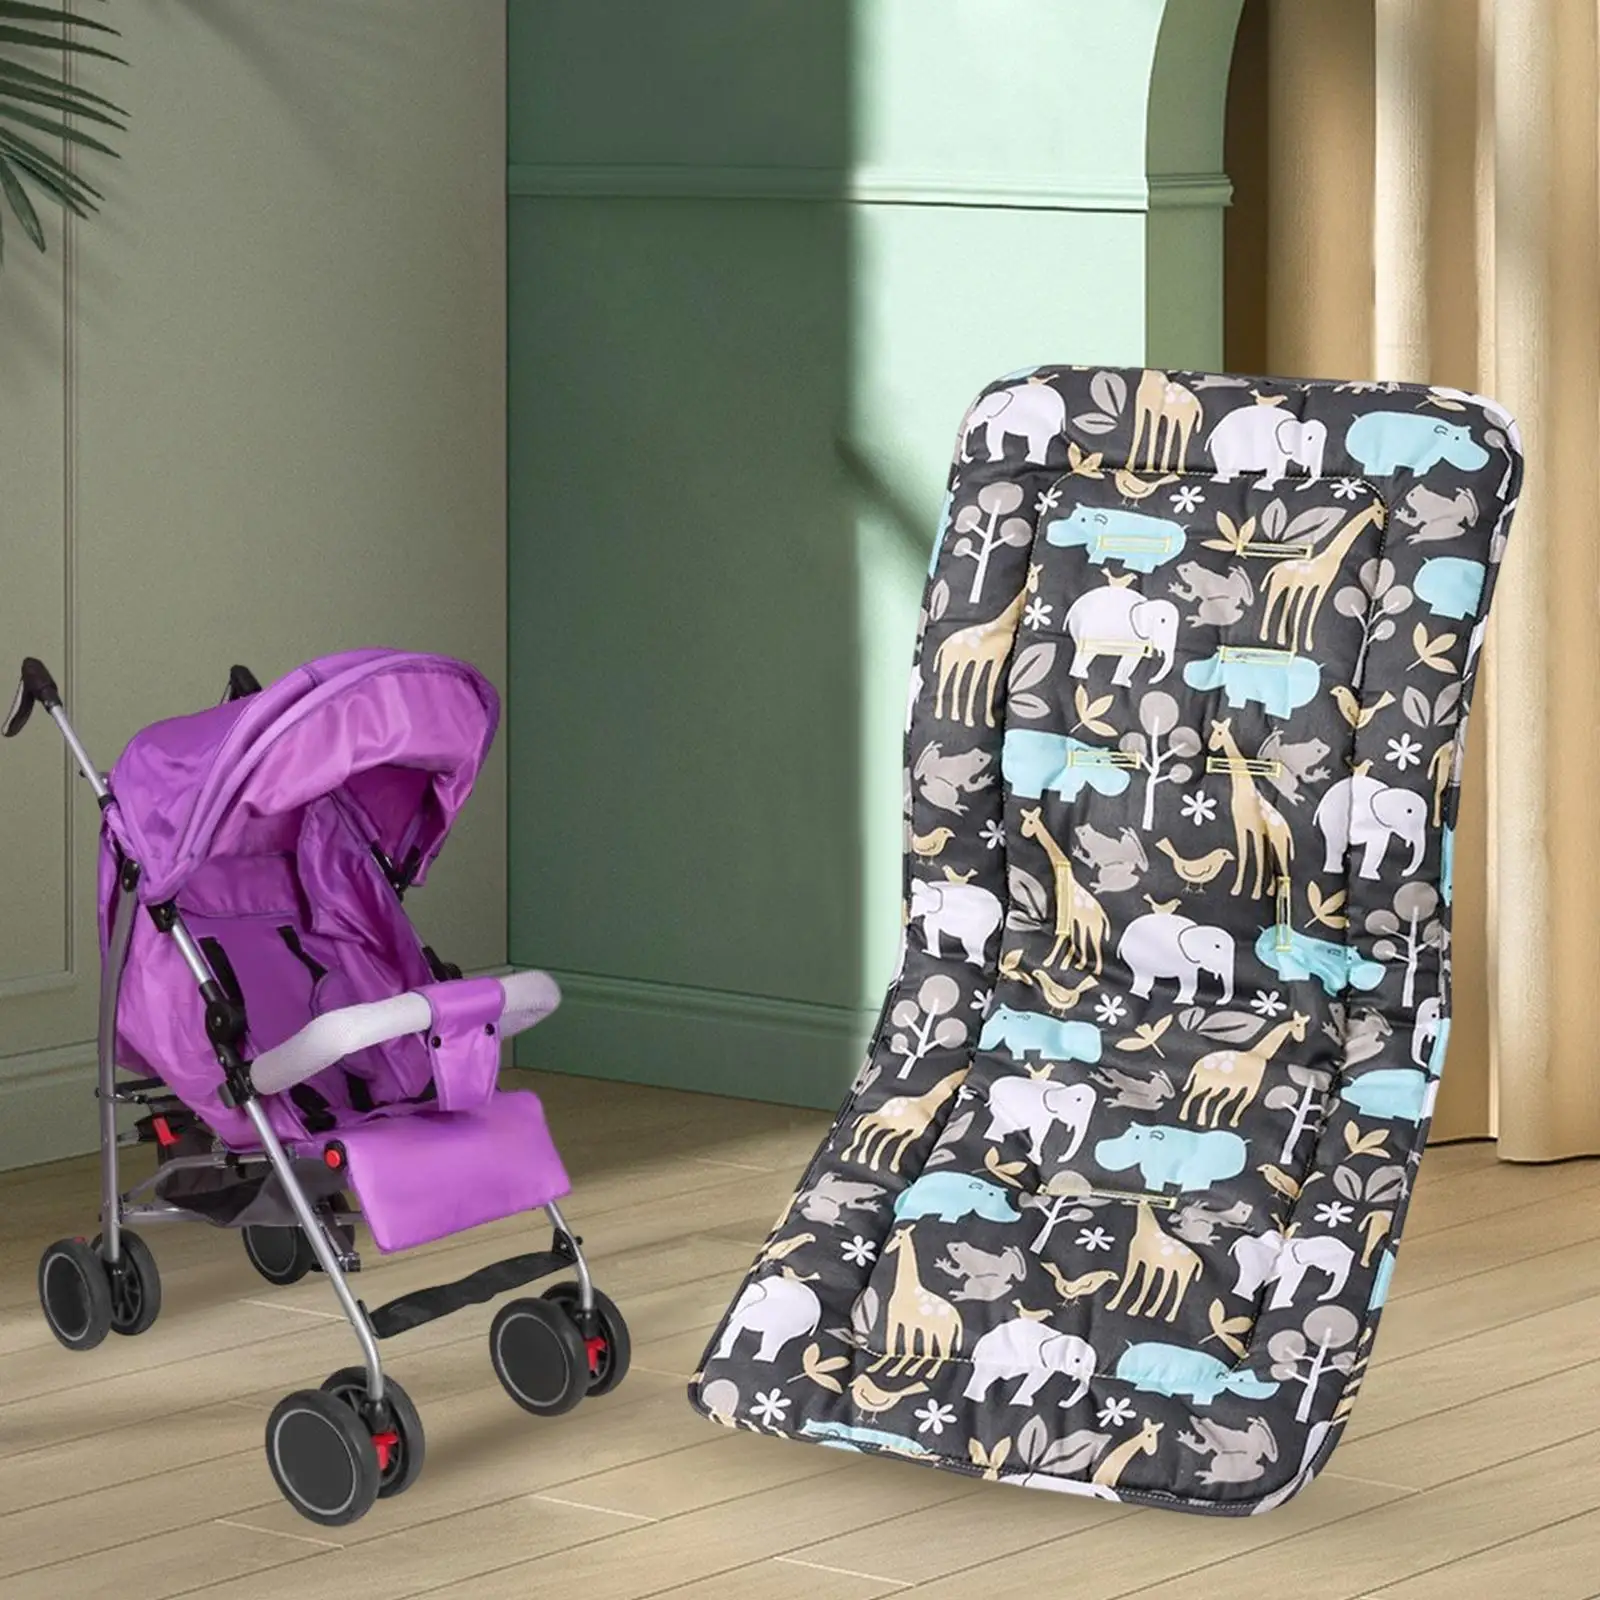 Universal Cushion, Trolley Mattress, Breathable Seat Cushion,  for Accessories